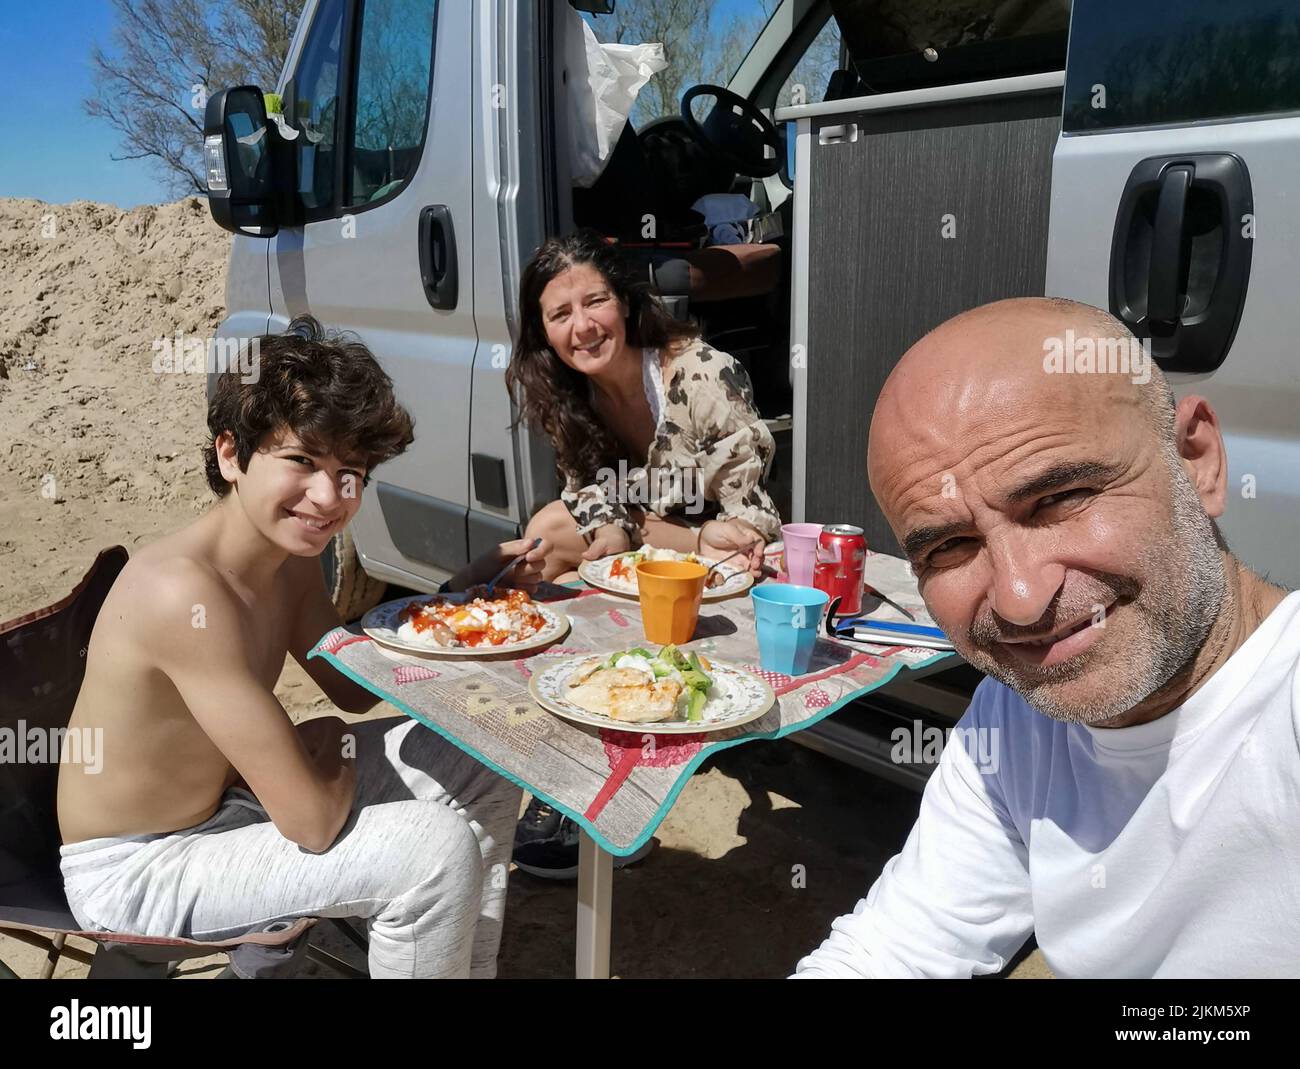 Family enjoying a meal outdoors in a motorhome Stock Photo